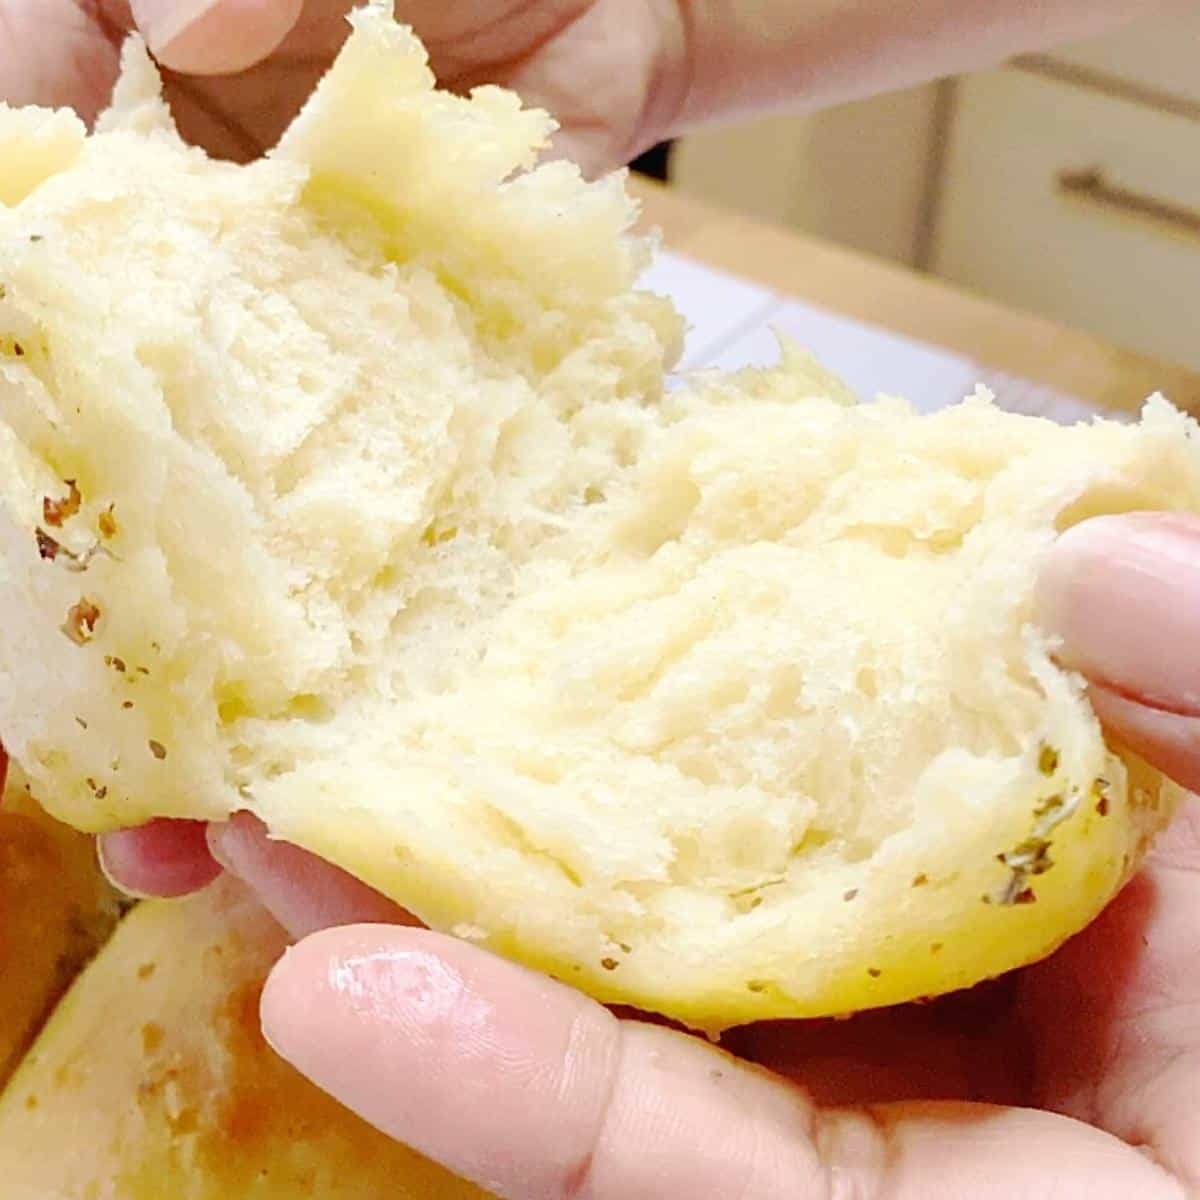 Showing the inside of a garlic roll.